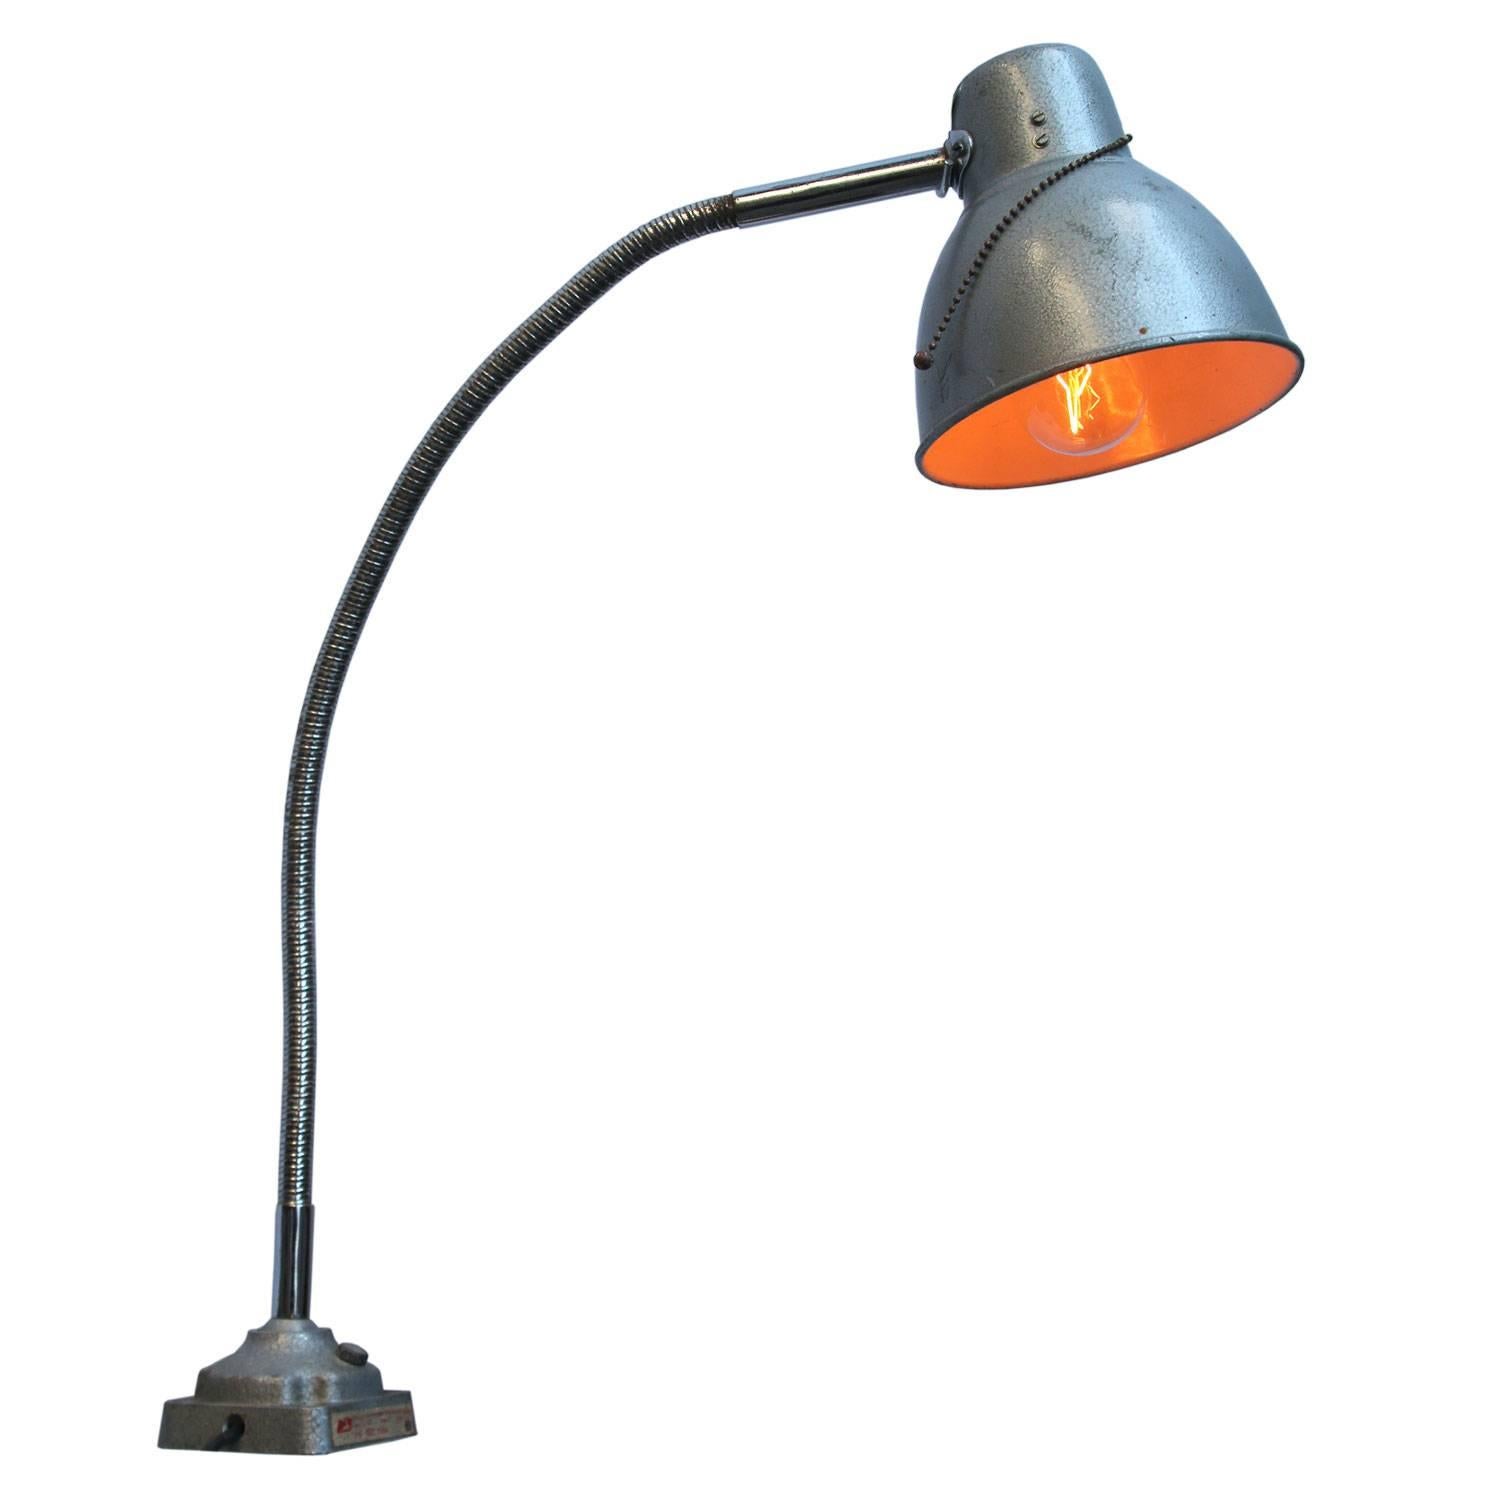 Metal work light with flexible arm. 
Aluminium shade. Pull chain bulb holder.

Weight: 1.4 kg / 3,1 lb

Priced per individual item. All lamps have been made suitable by international standards for incandescent light bulbs, energy-efficient and